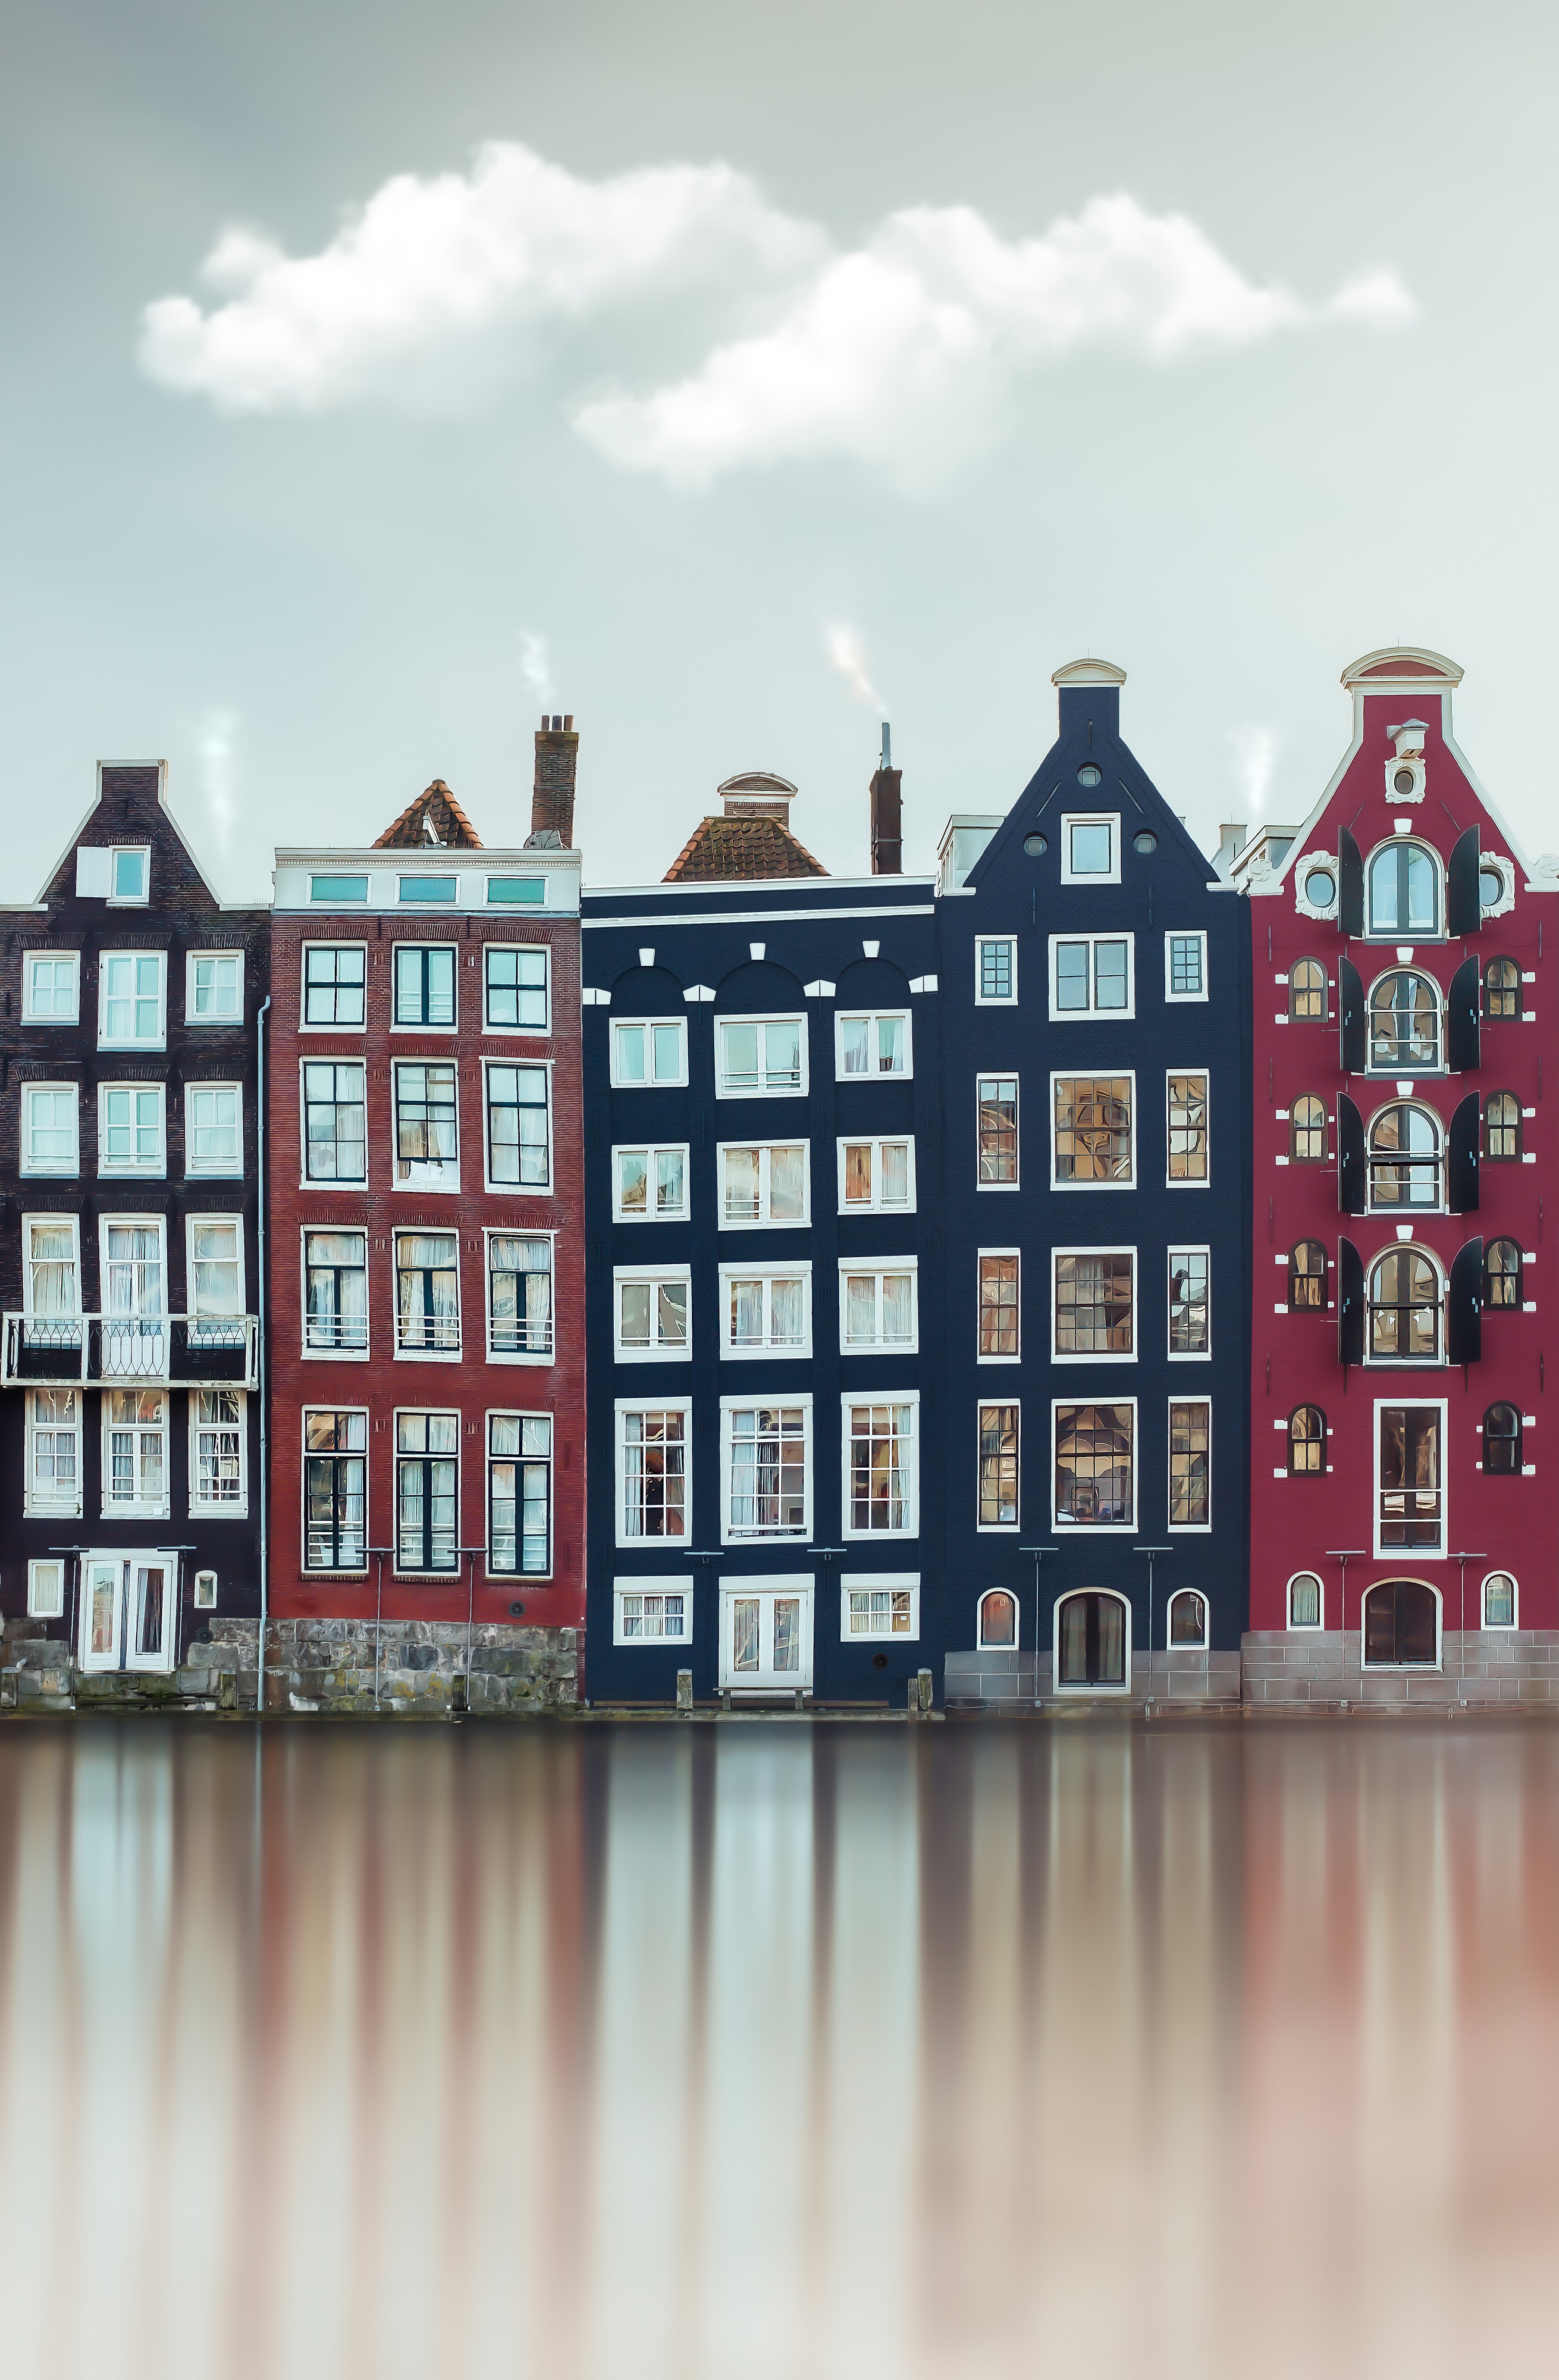 cities, water, houses, rivers, city, building, facade for Windows